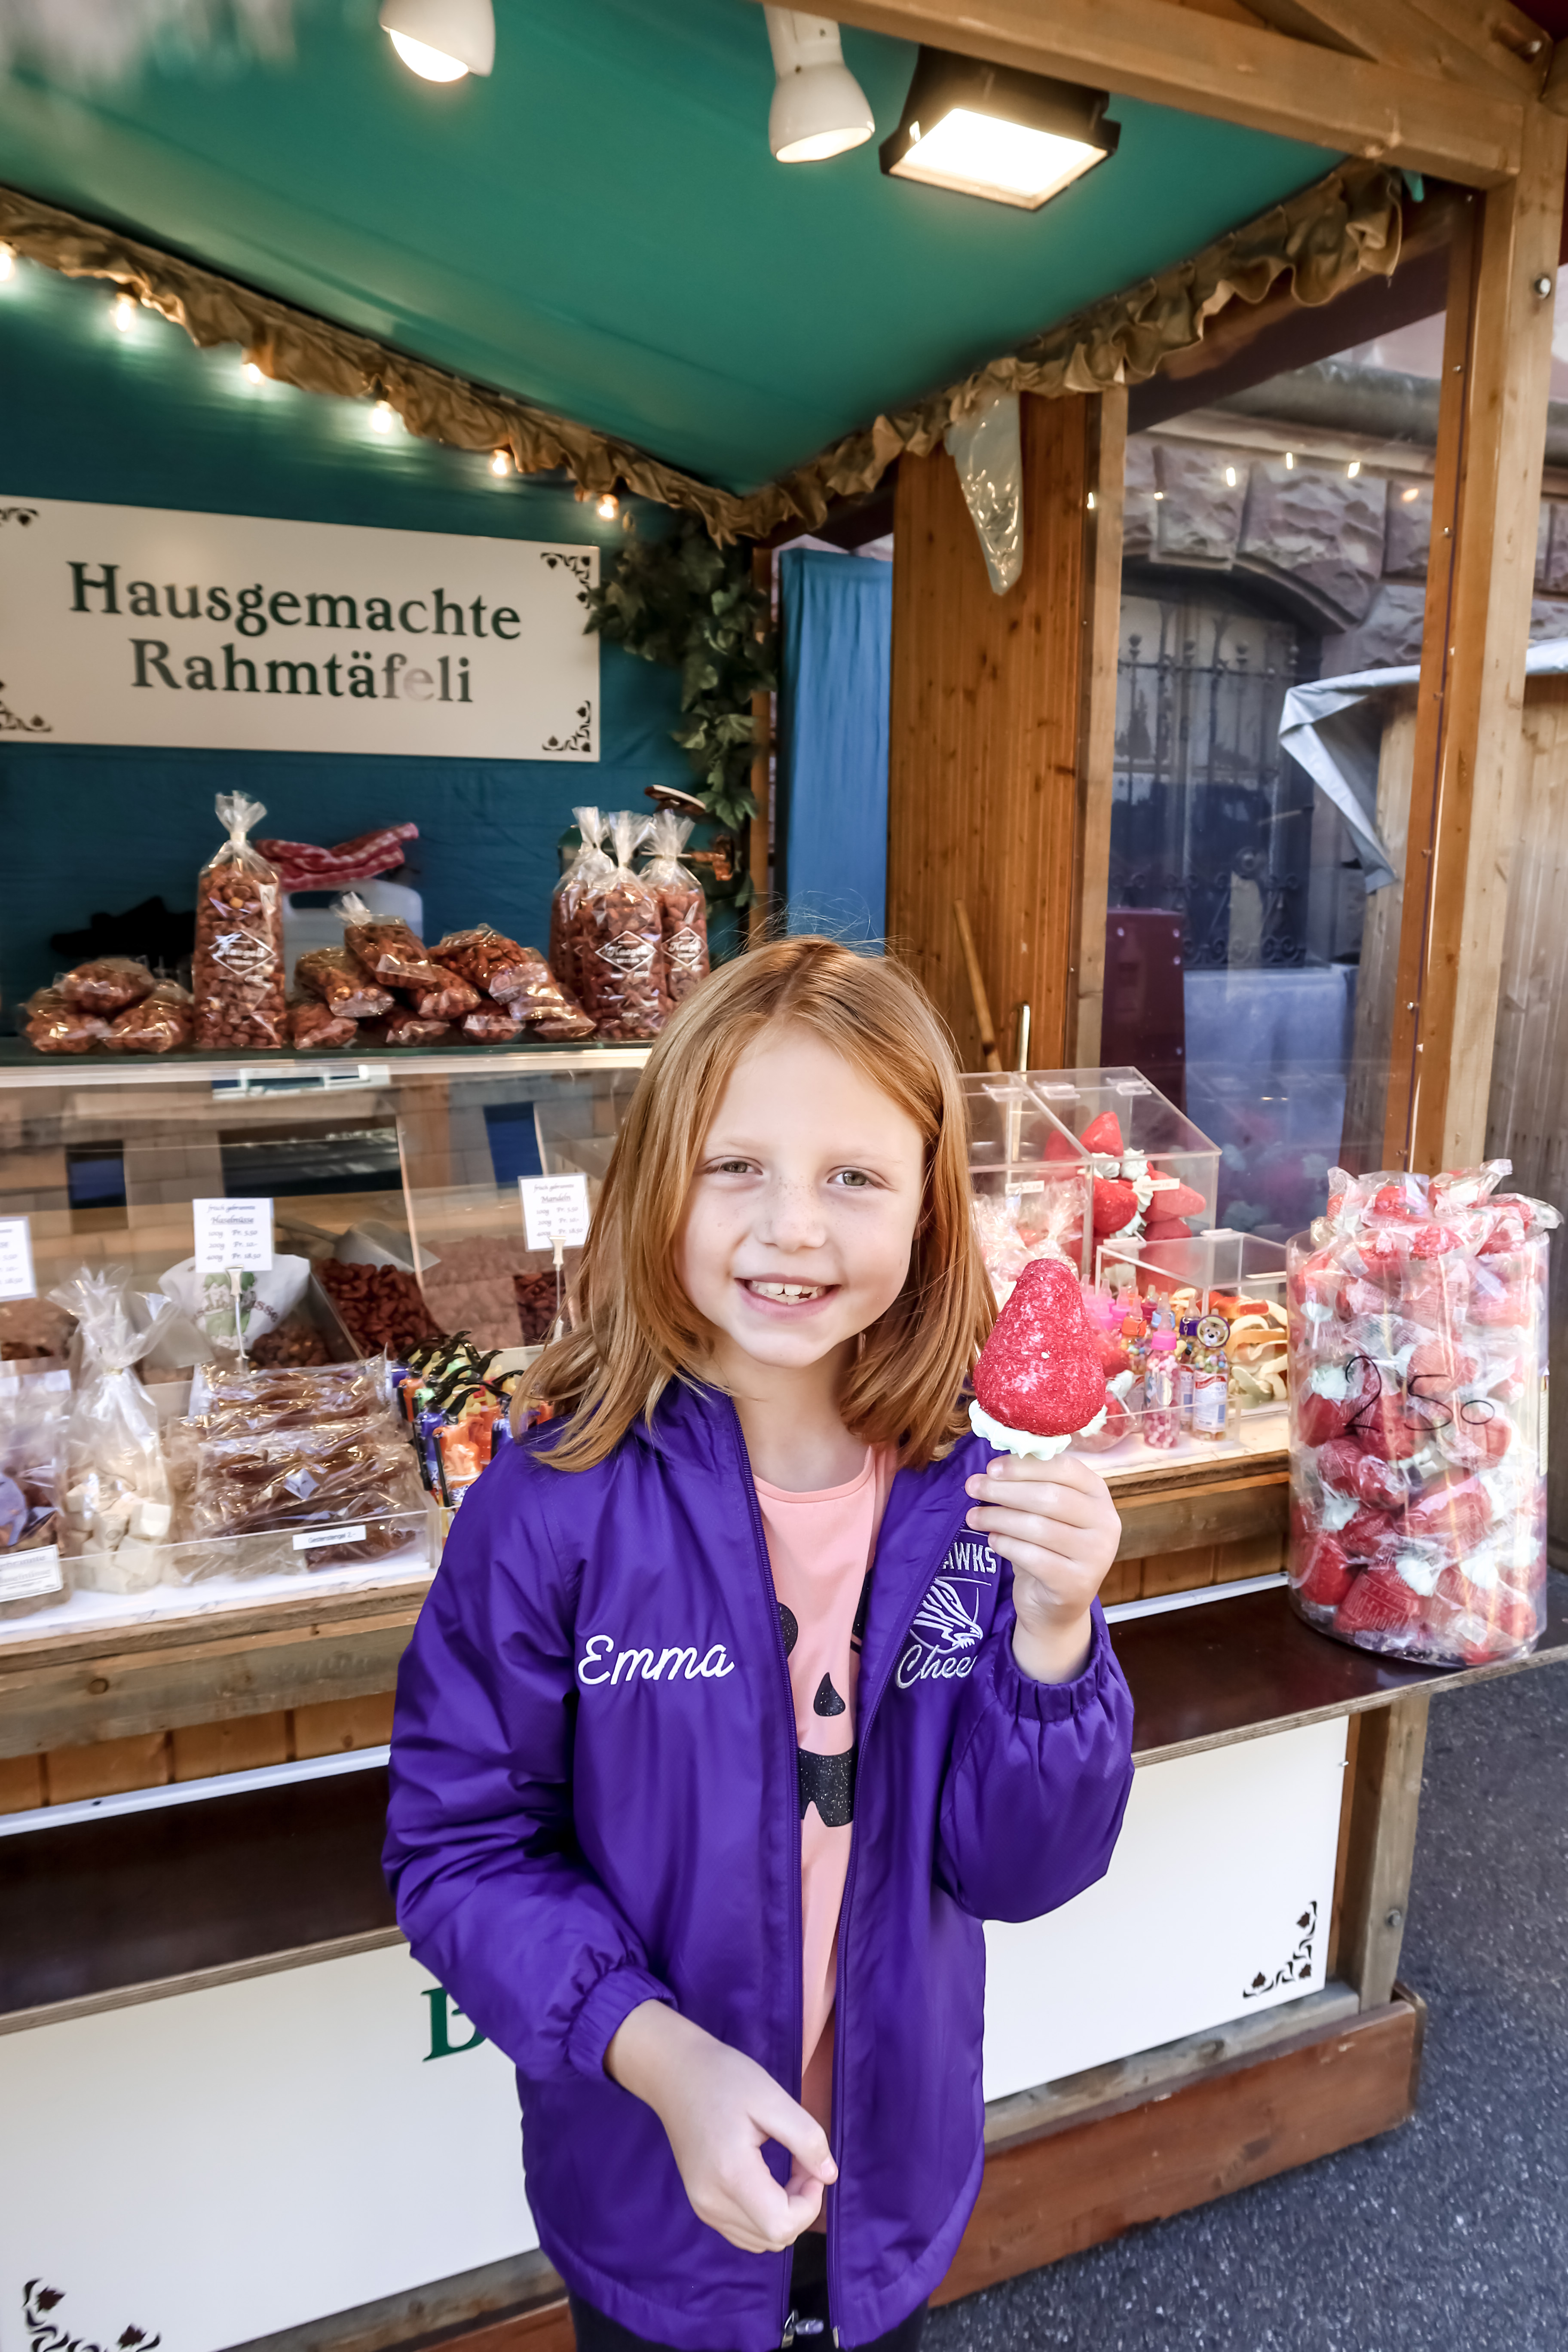 FIVE GREAT FOODS TO EAT AT HERBSTMESSE